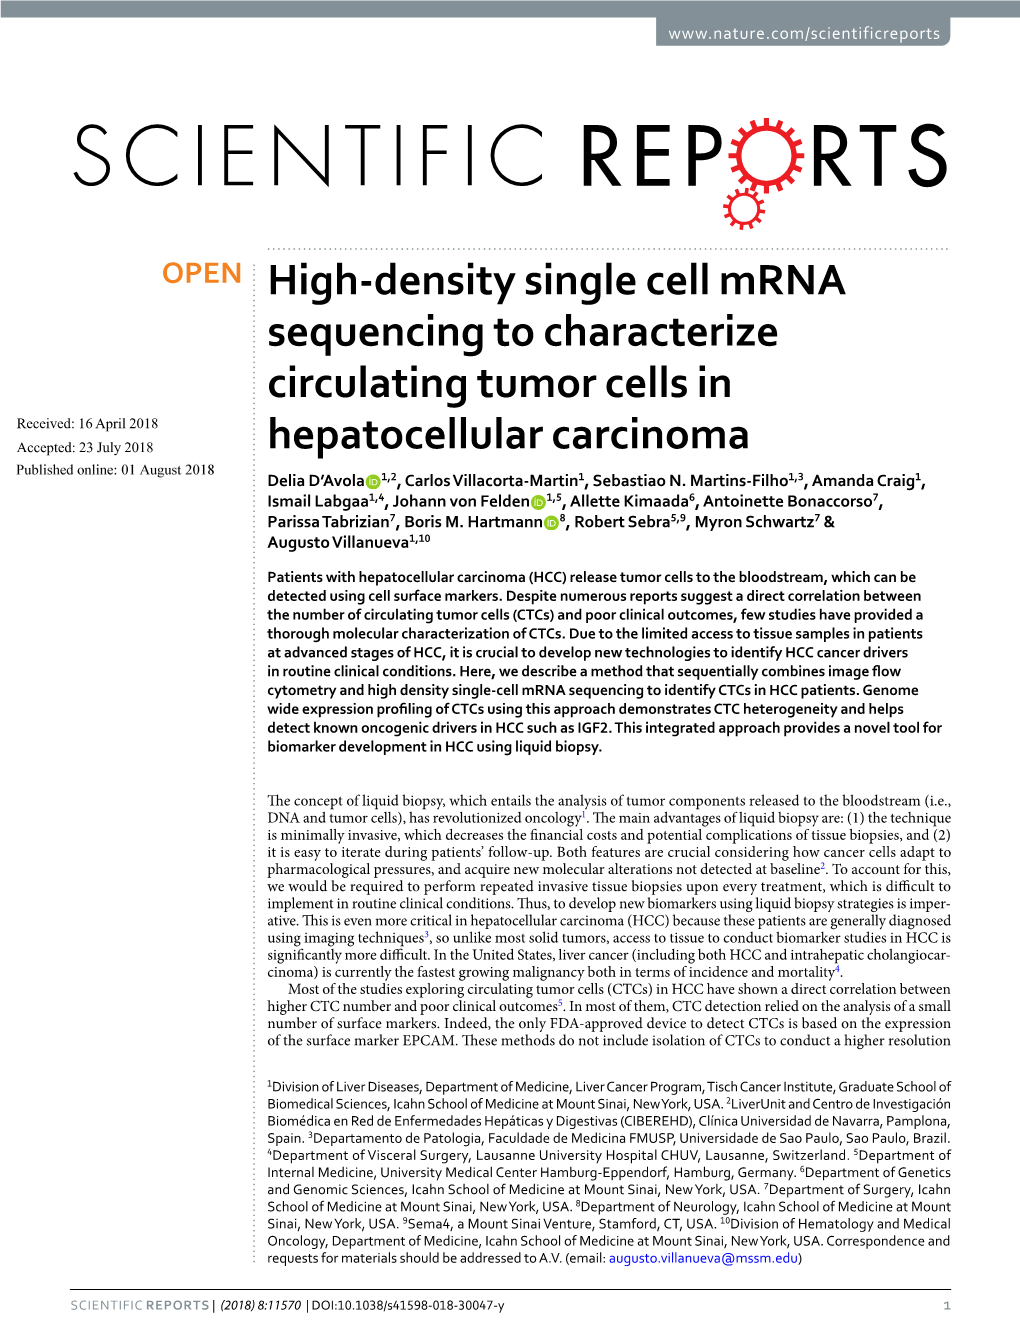 High-Density Single Cell Mrna Sequencing to Characterize